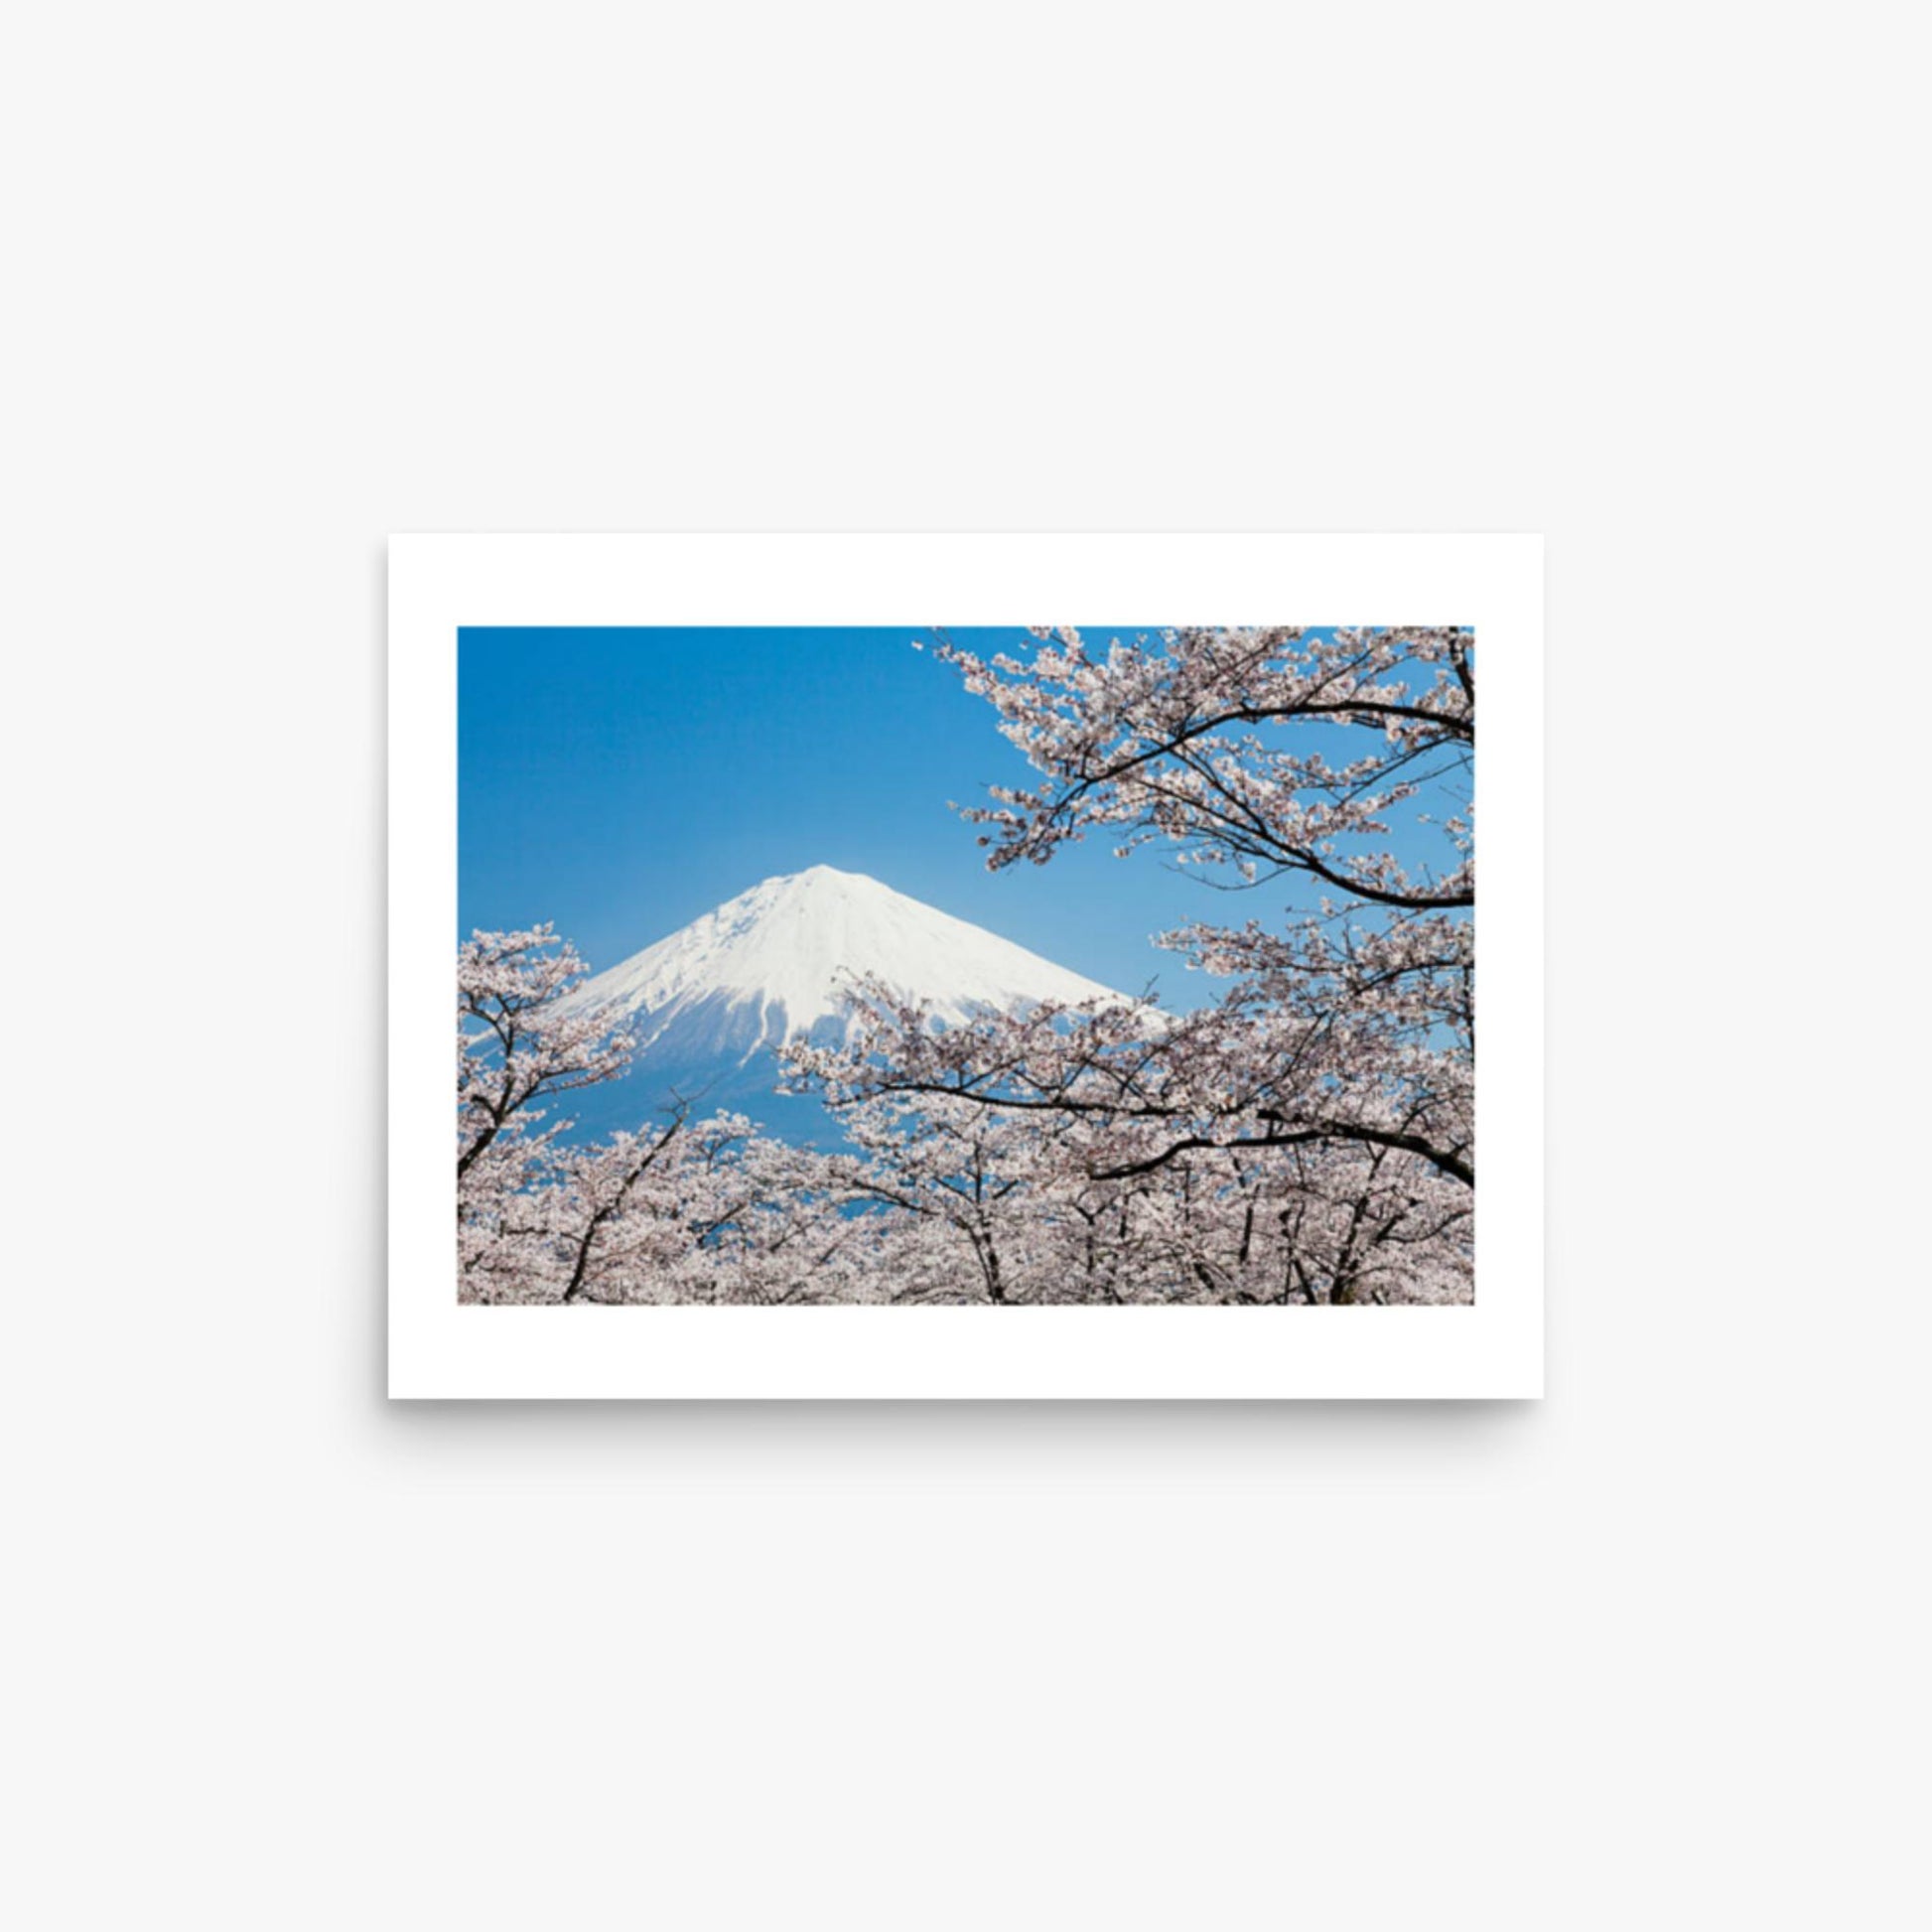 Mount Fuji & Cherry Blossoms 12x16 in Poster